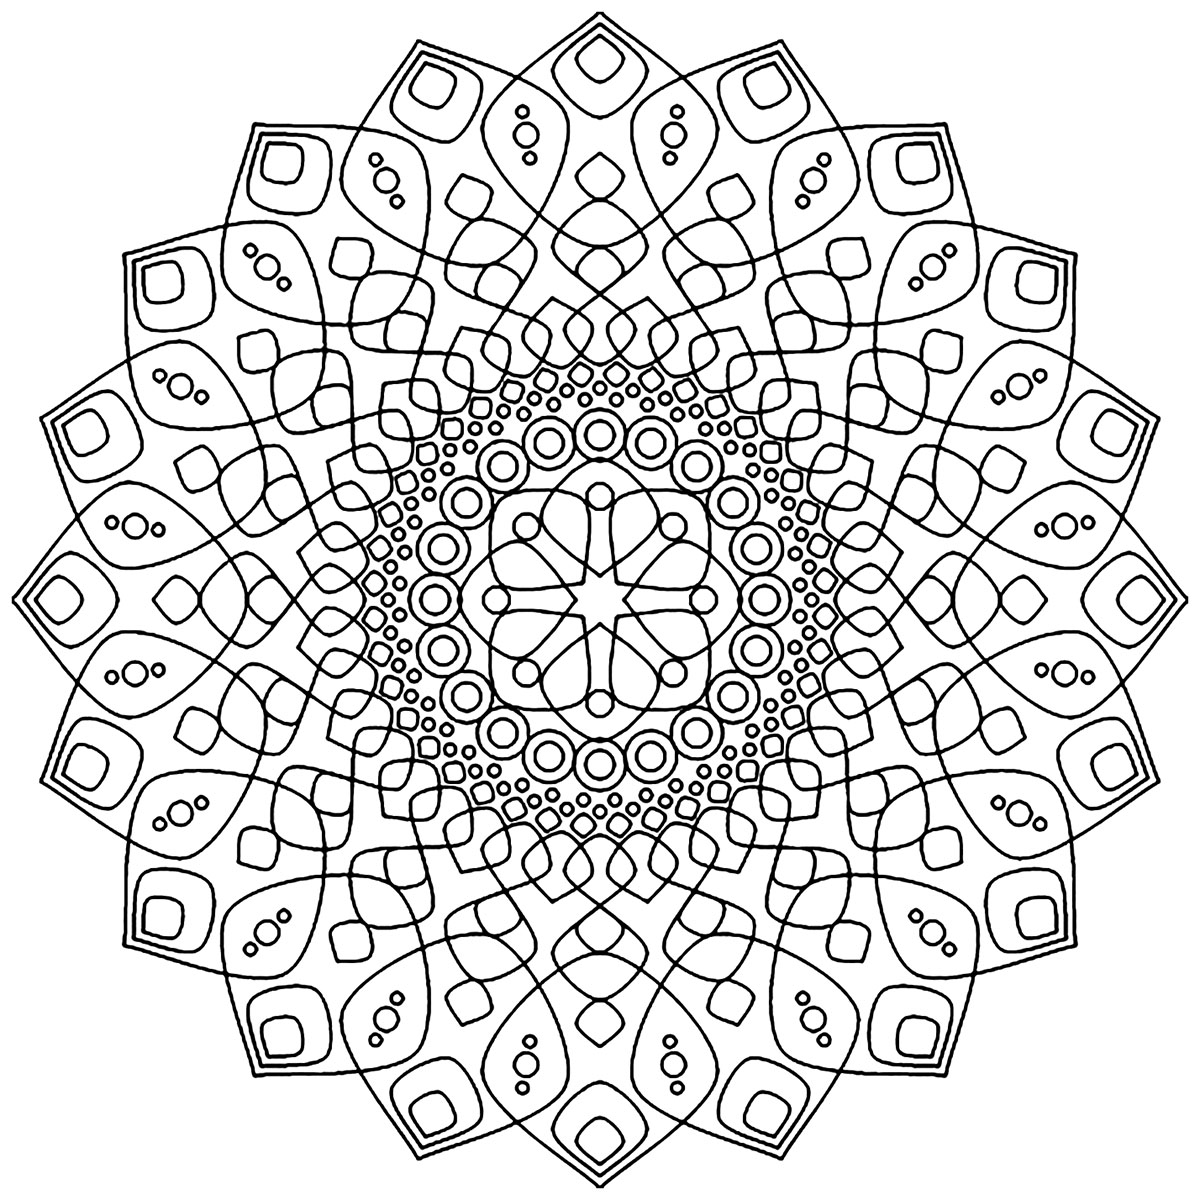 If you are ready to spend some minutes of relaxation, get ready to color this complex and really hypnotic Mandala ...